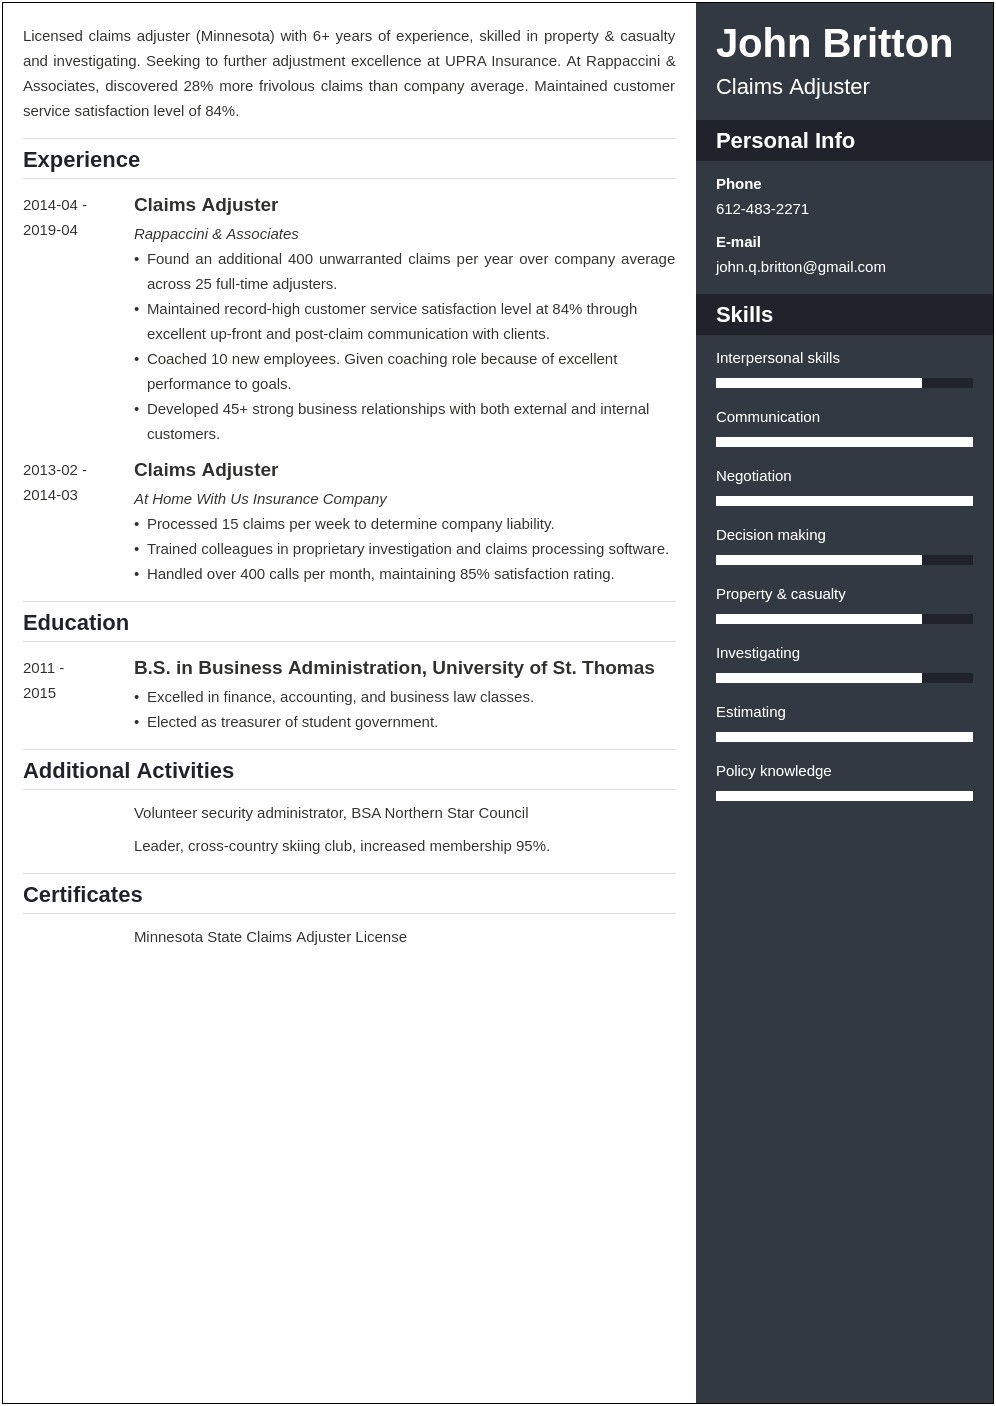 Workers Compensation Adjuster Resume Examples Monster